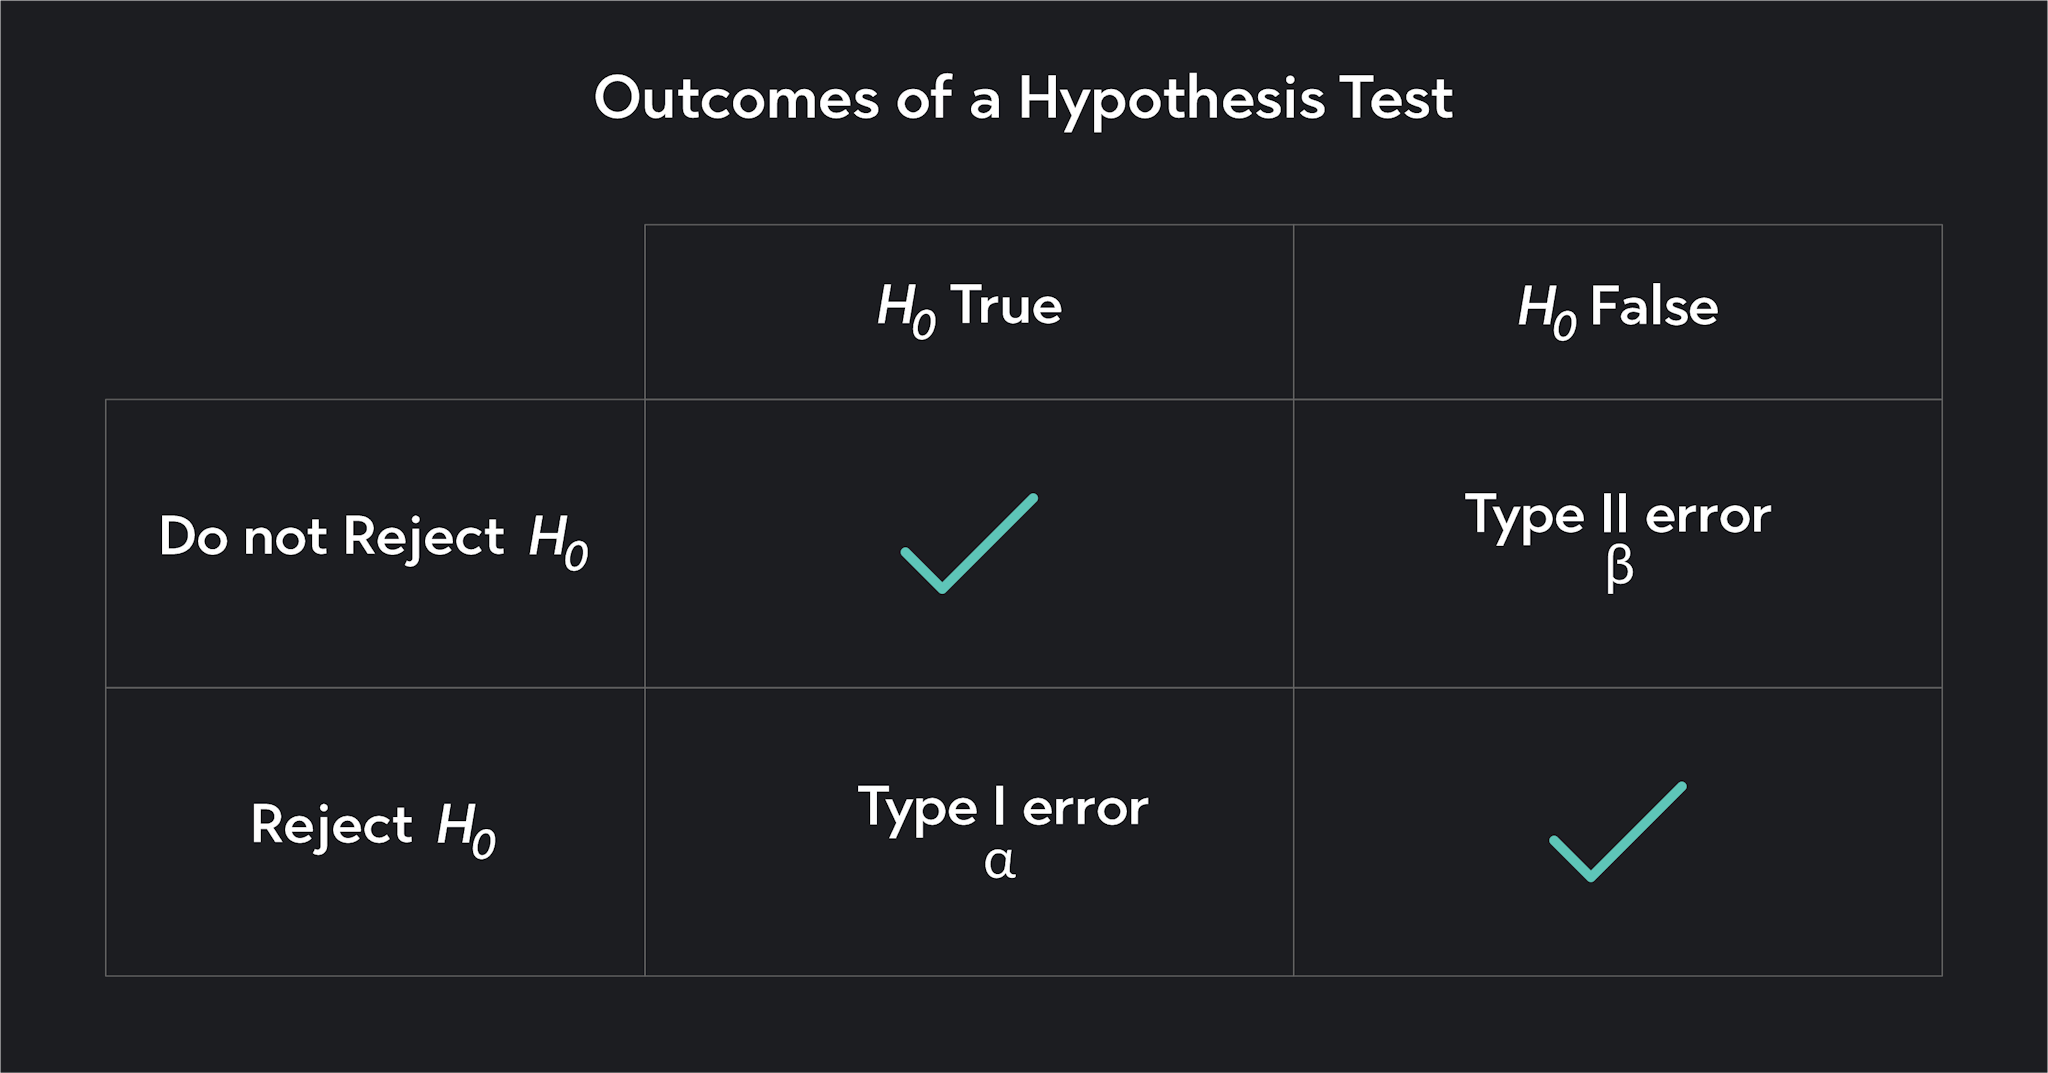 Outcomes of a Hypothesis test showing type I and type II errors